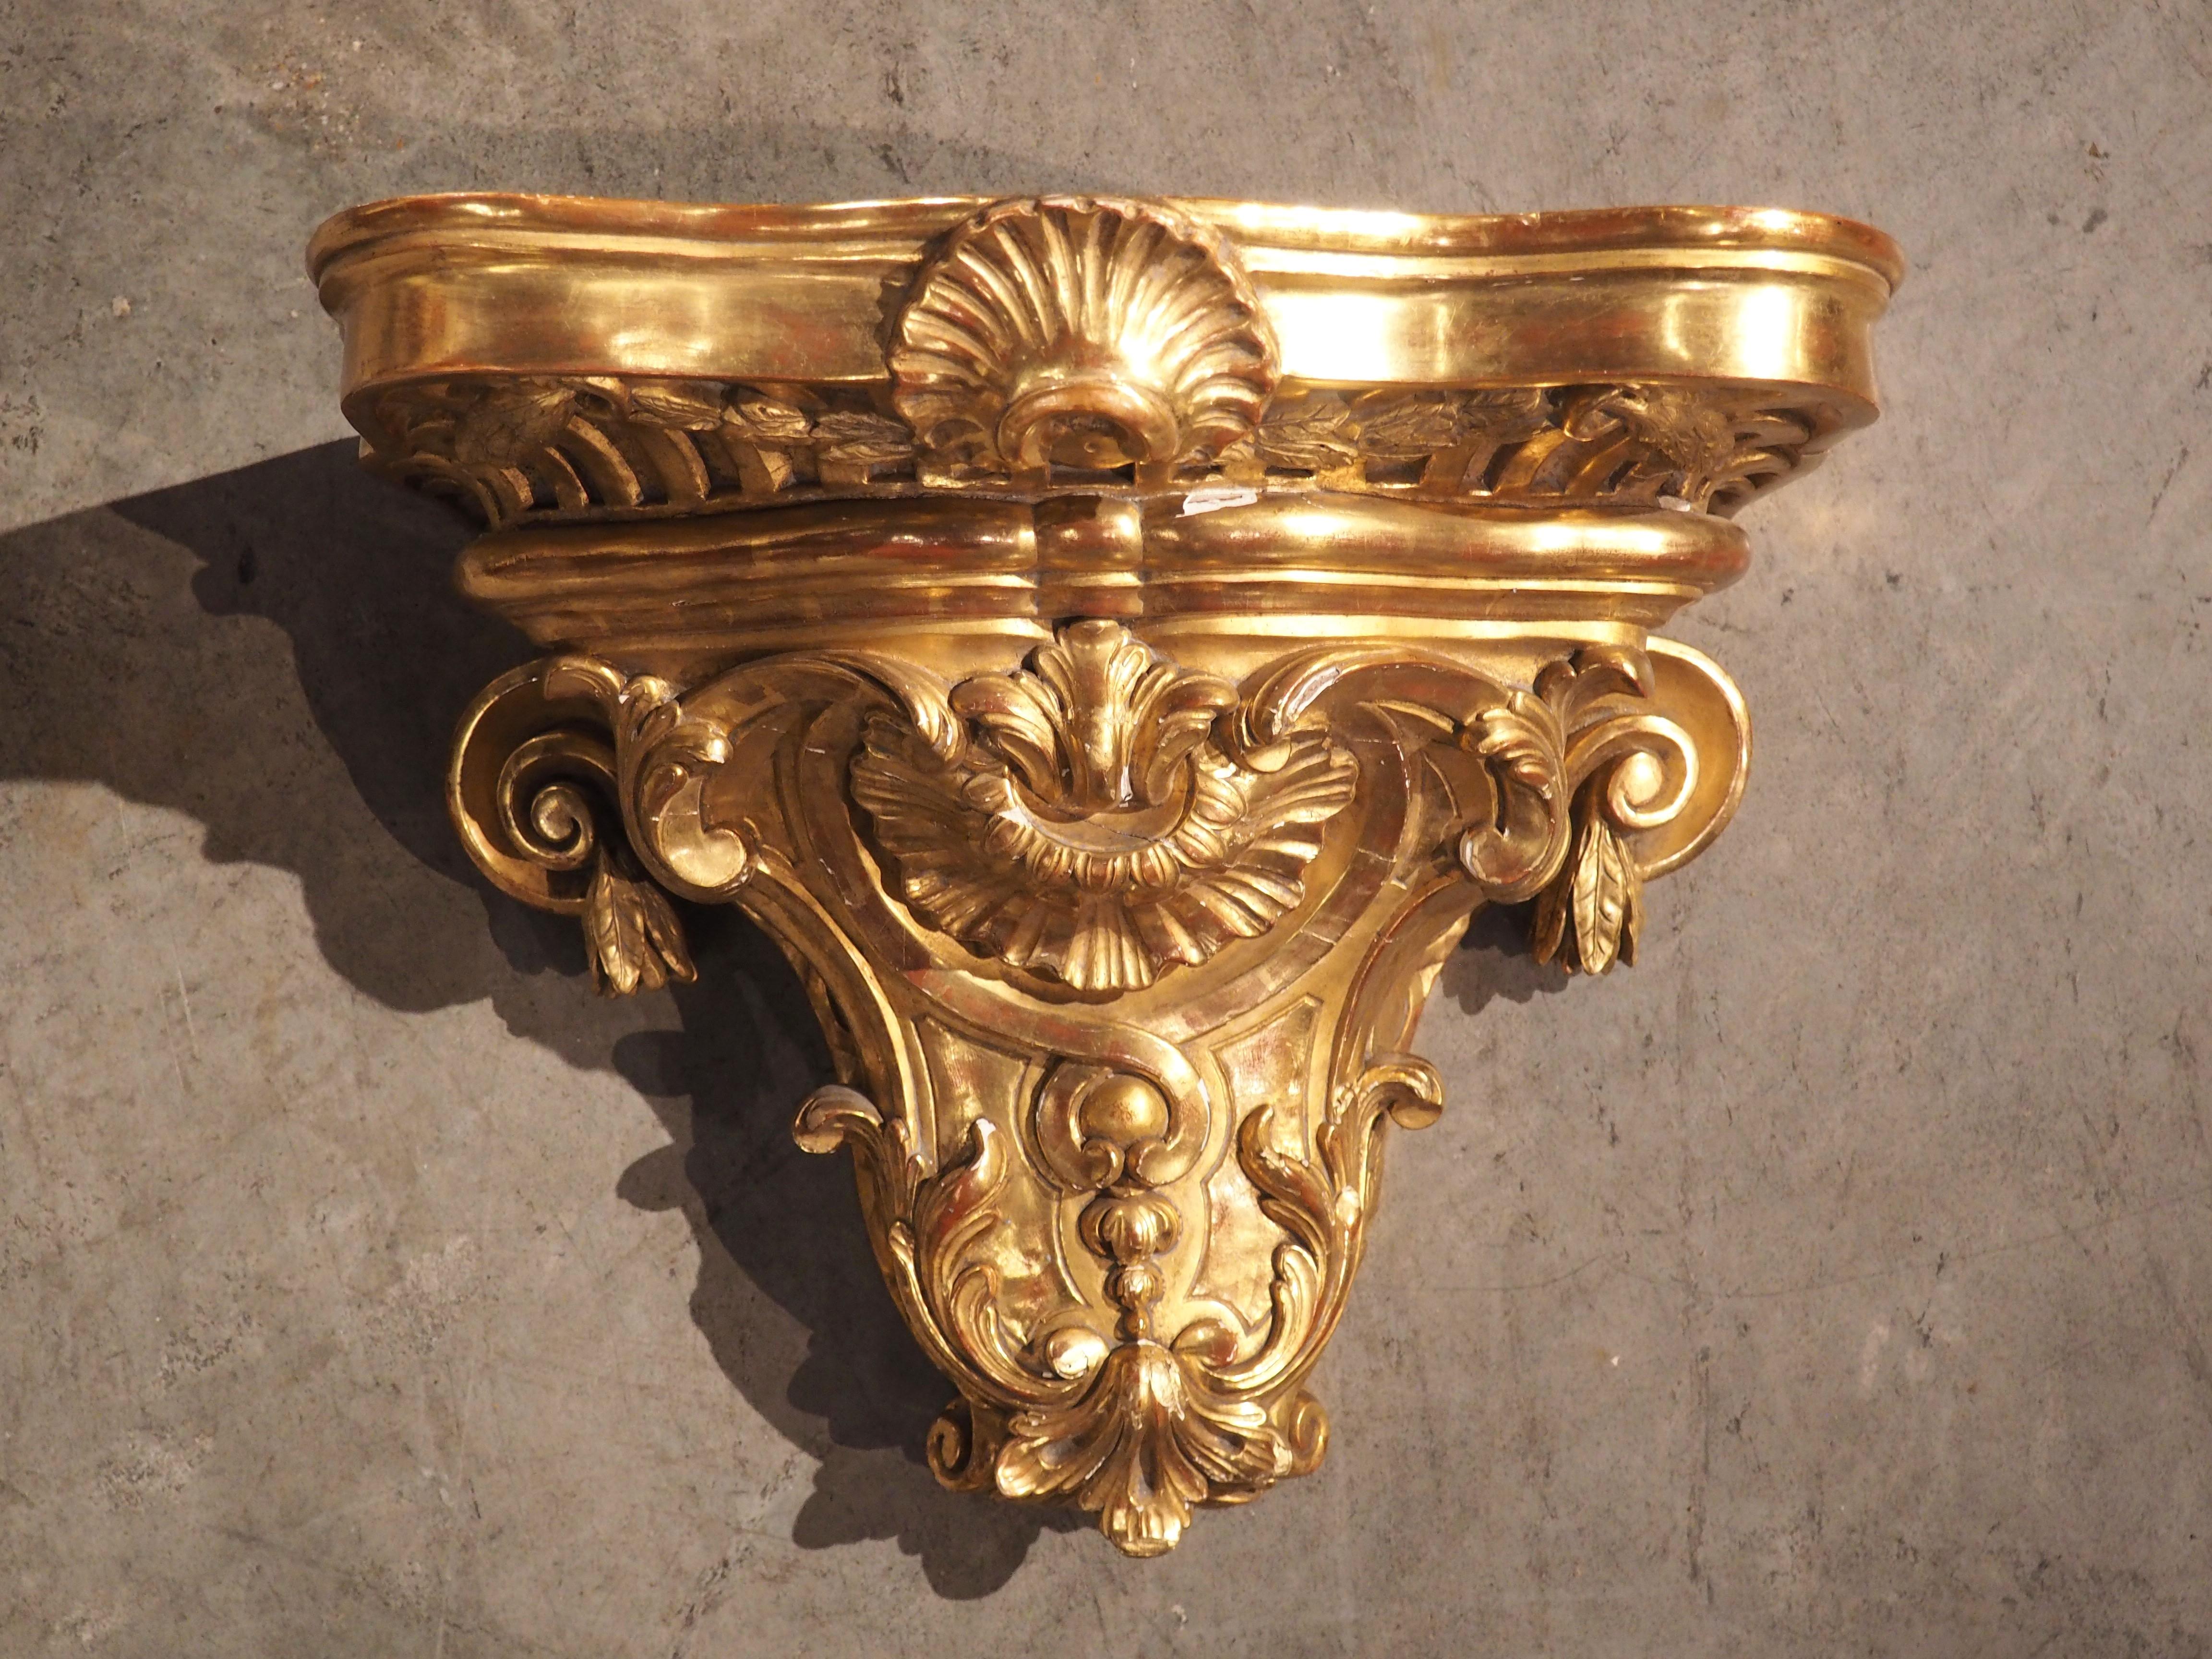 Hand-Carved Circa 1850 Hand Carved Giltwood Wall Bracket from France For Sale